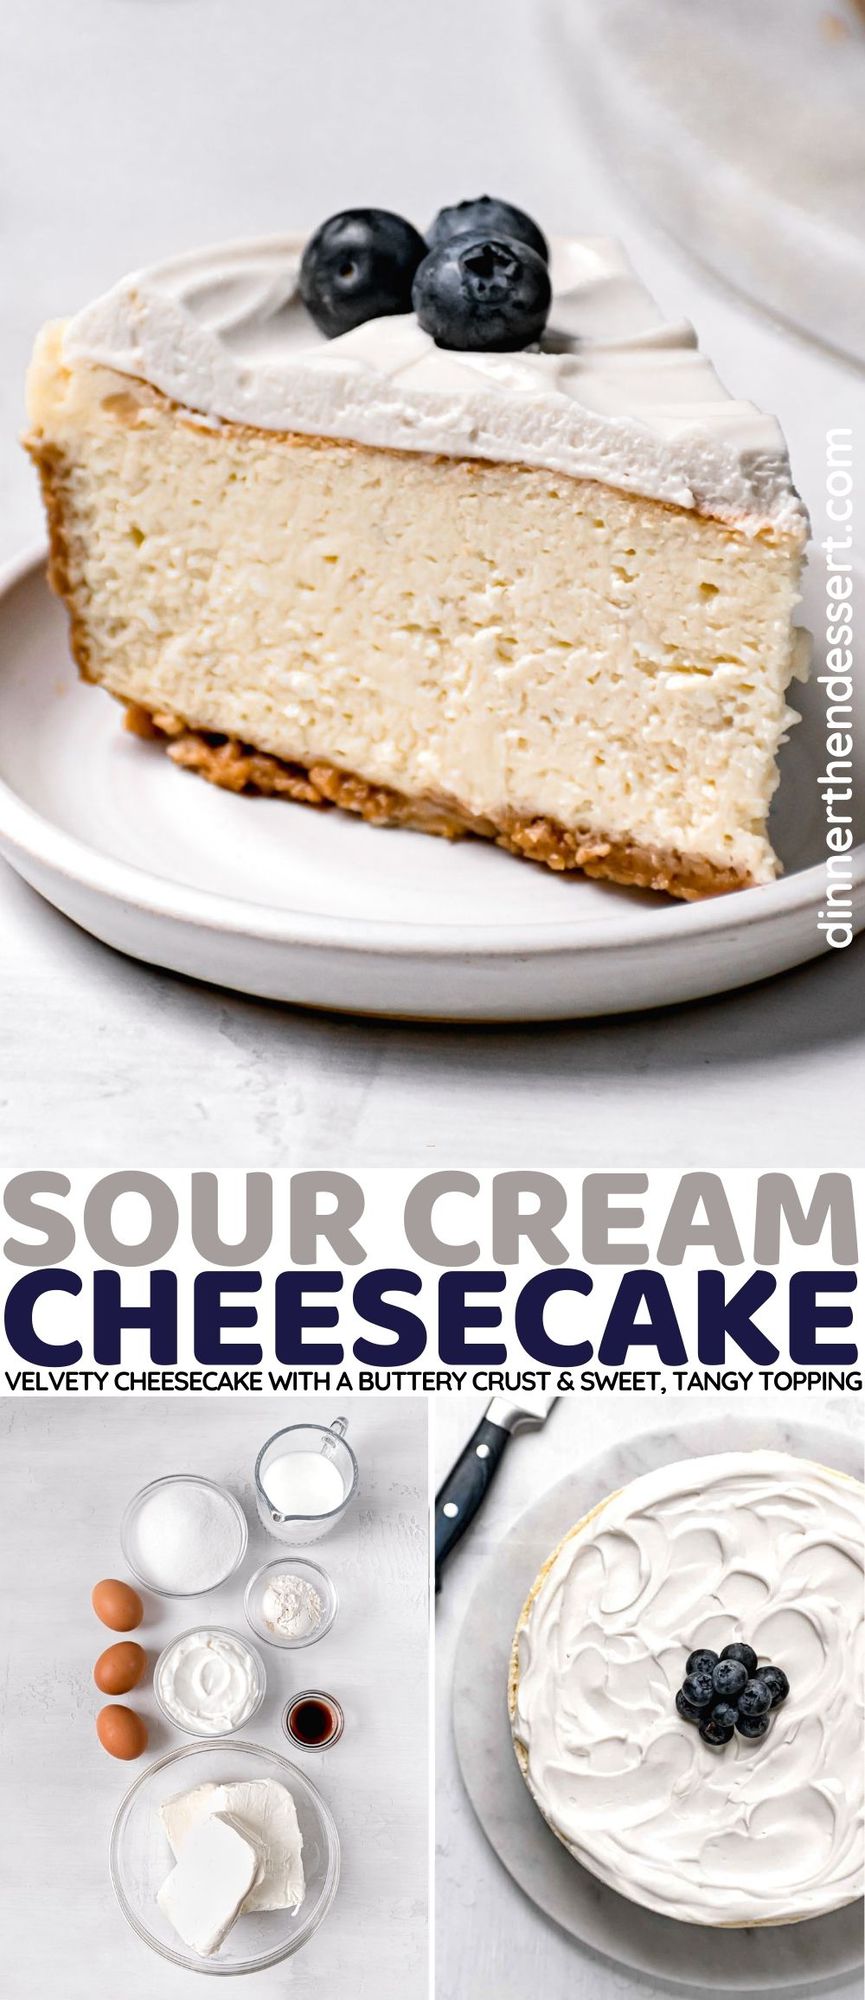 Sour Cream Cheesecake slice on plate collage